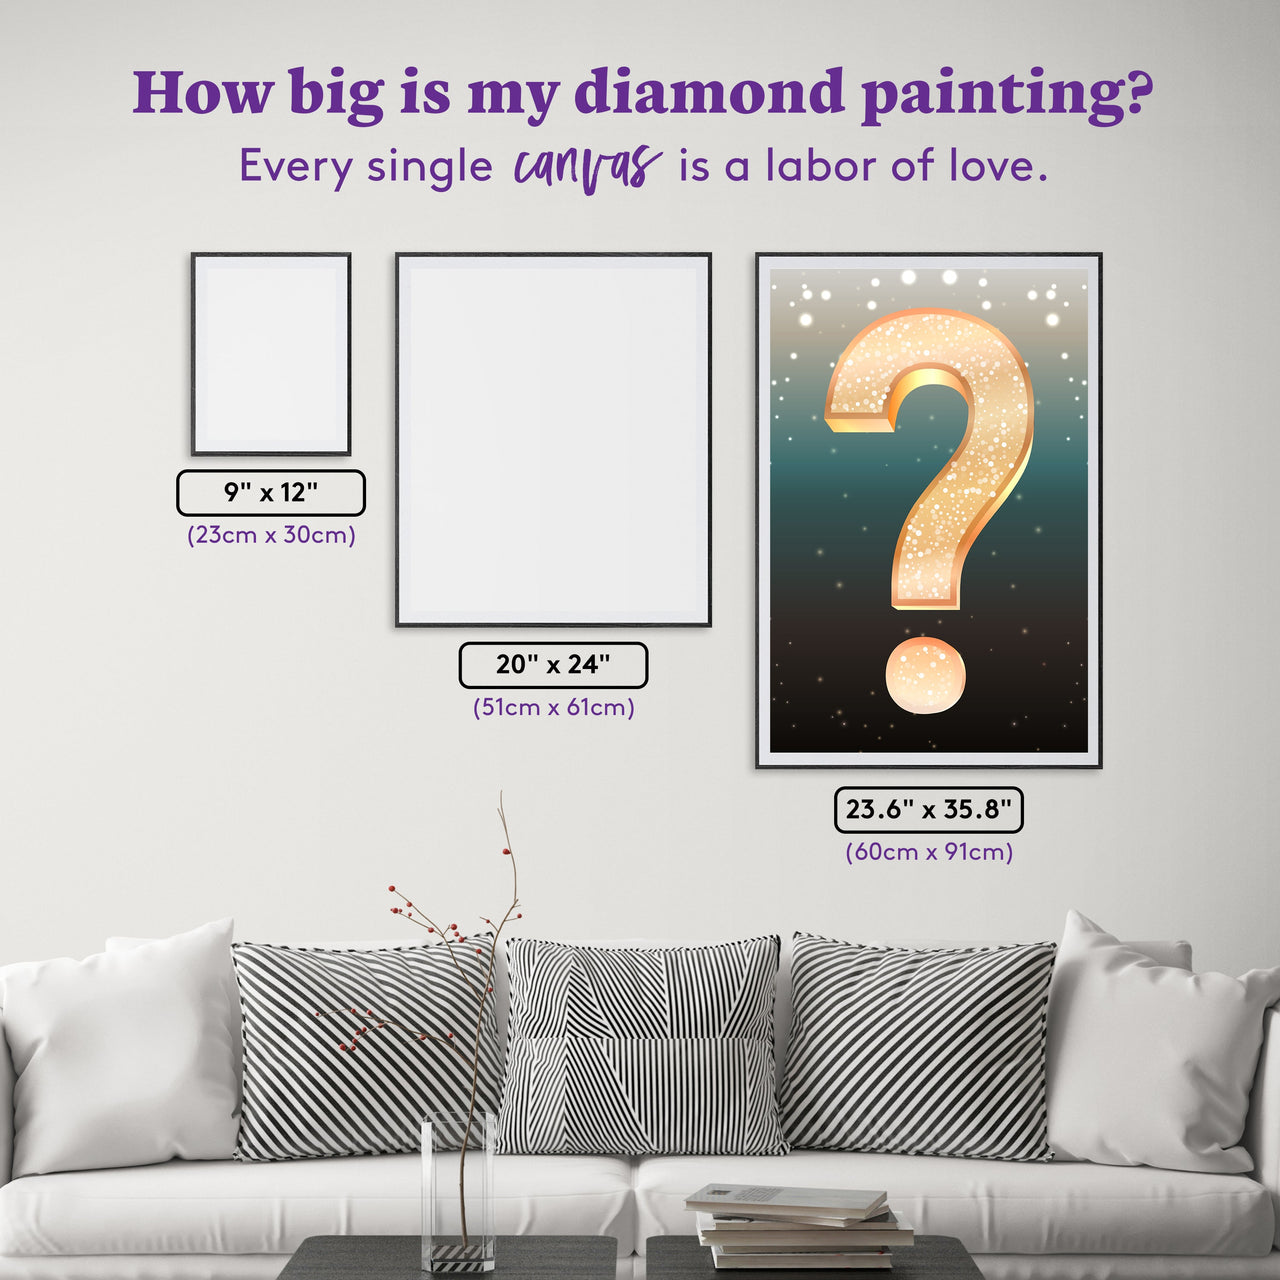 Diamond Painting Mystery Kit - Fantasy (Ocean) 23.6" x 35.8" (60cm x 91cm) / Square With 62 Colors Including 2 ABs and 3 Fairy Dust Diamonds / 87,600